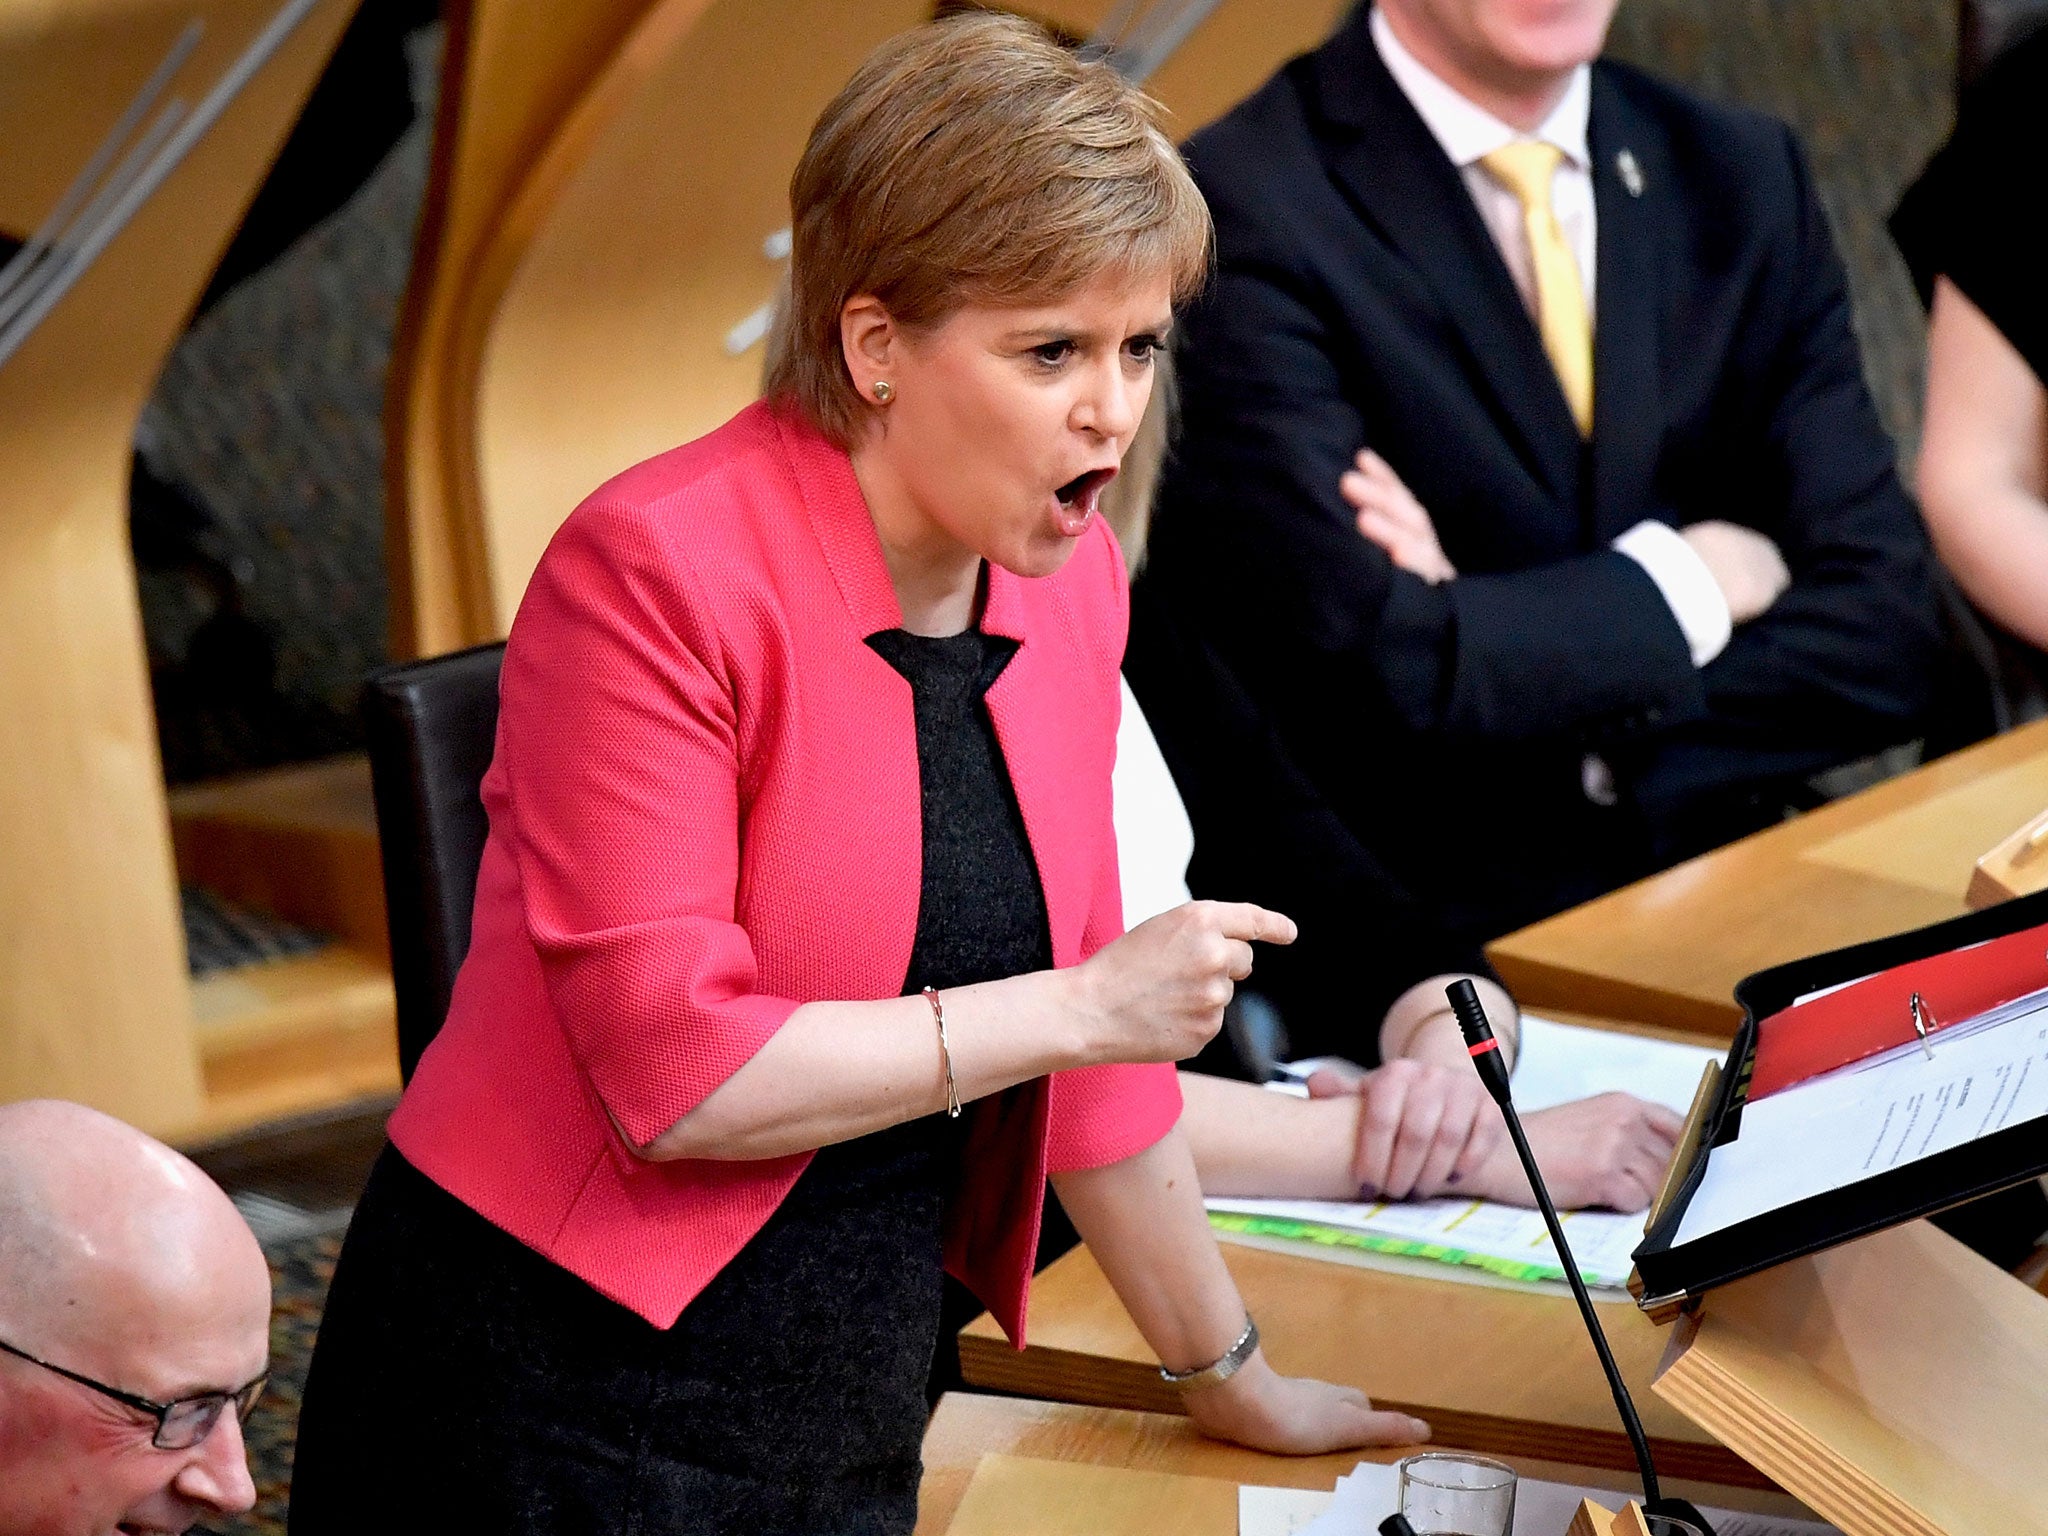 Nicola Sturgeon takes questions at First Minister's Questions inside the Scottish Parliament on March 16, 2017